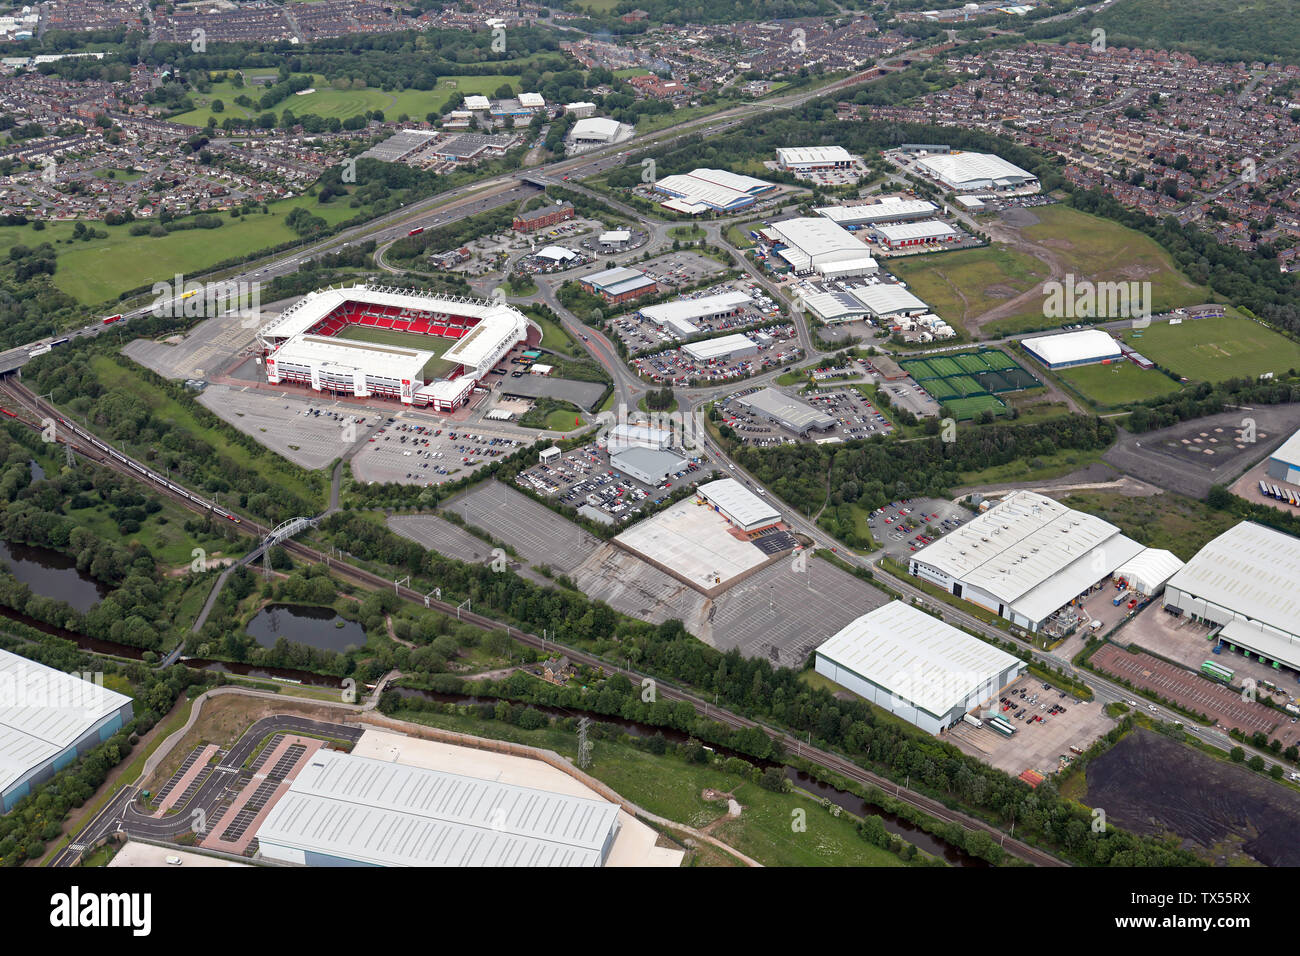 aerial view of Stoke showing the A50 road, Bet 365 football stadium and various industrial & business units, Staffordshire, UK Stock Photo